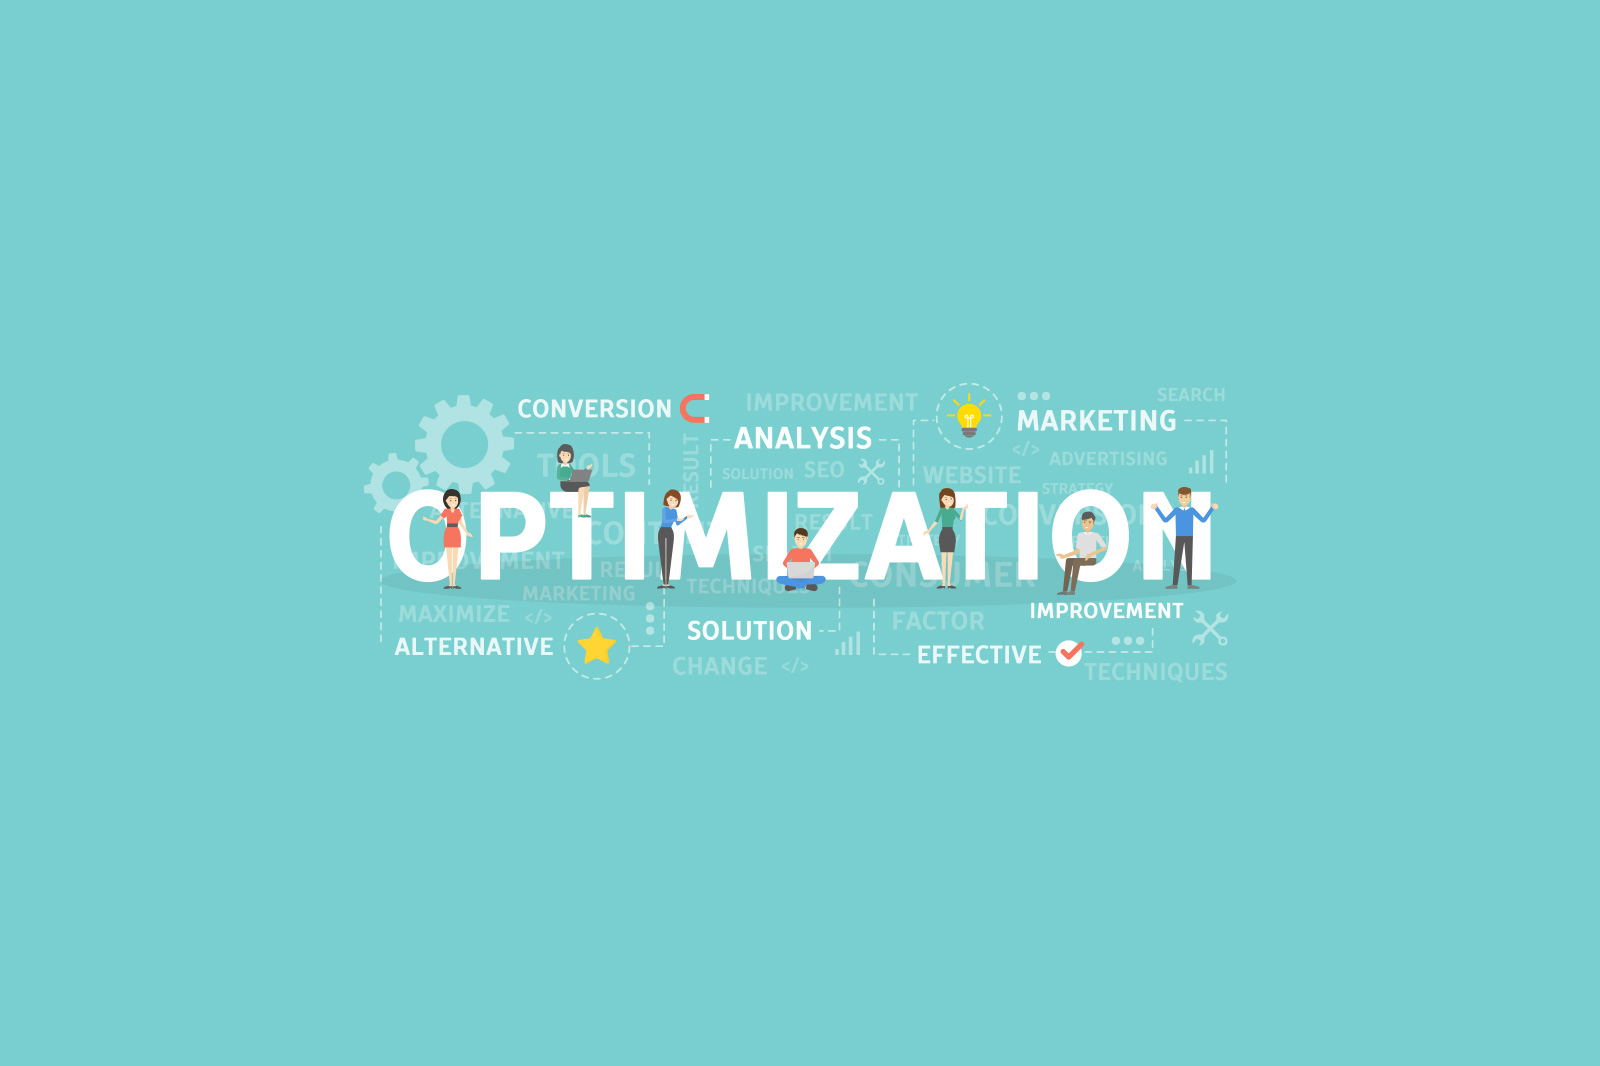 Common Mistakes with Optimization